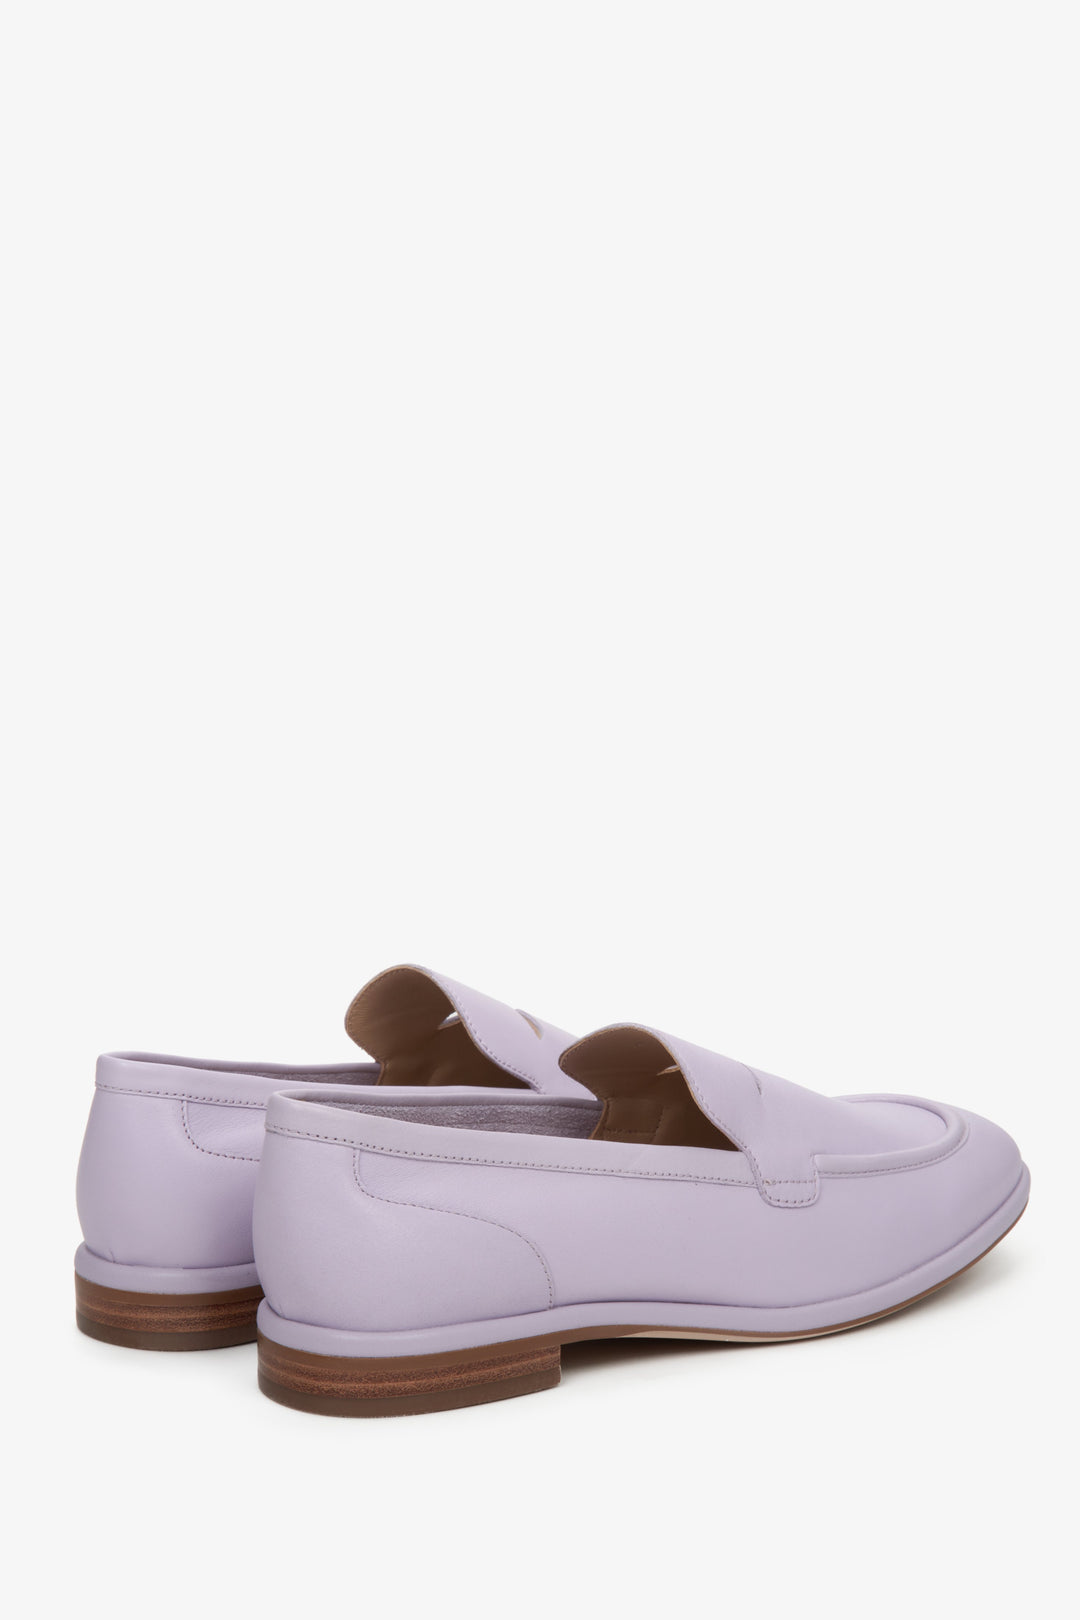 Purple, leather women's moccasins by Estro - close-up on the side vamp and heel.